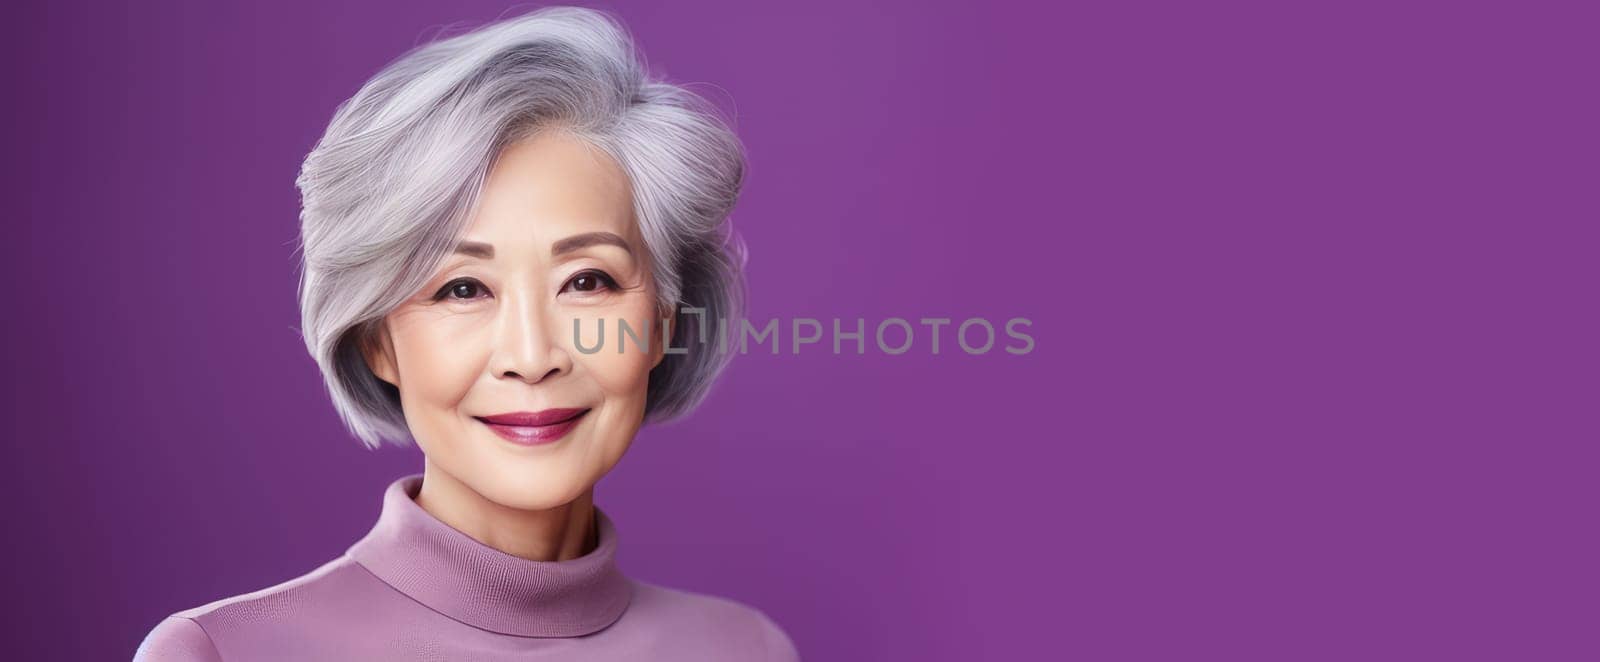 Elegant, smiling, elderly, chic Asian woman with gray hair and perfect skin on a purple background banner. Advertising of cosmetic products, spa treatments, shampoos and hair care products, dentistry and medicine, perfumes and cosmetology for women